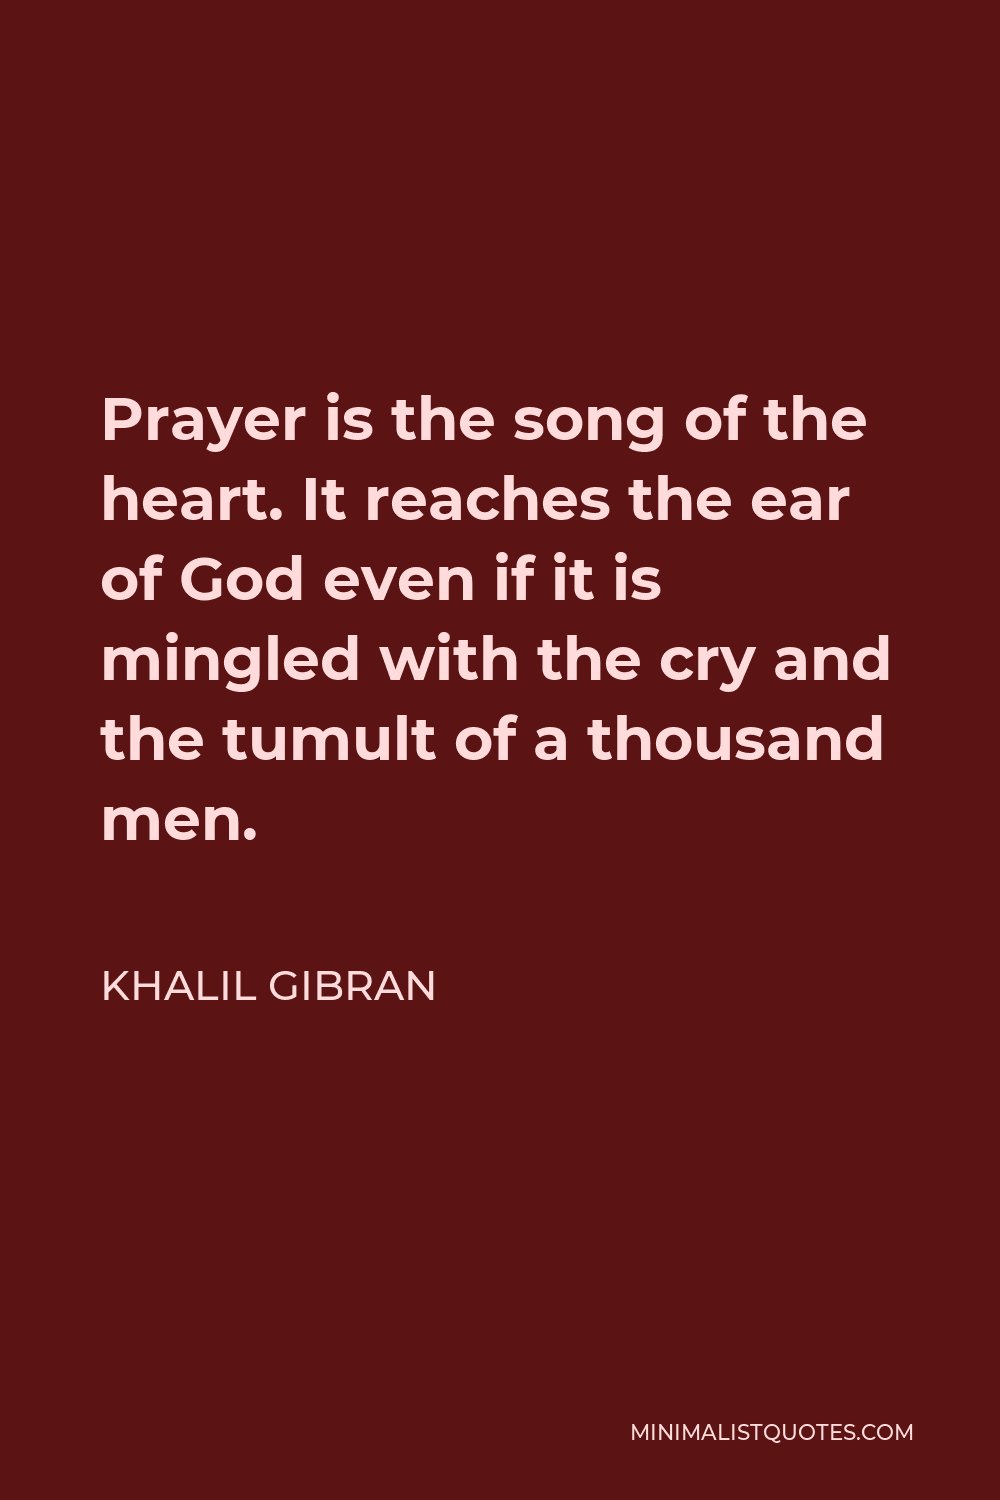 Khalil Gibran Quote - Prayer is the song of the heart. It reaches the ear of God even if it is mingled with the cry and the tumult of a thousand men.